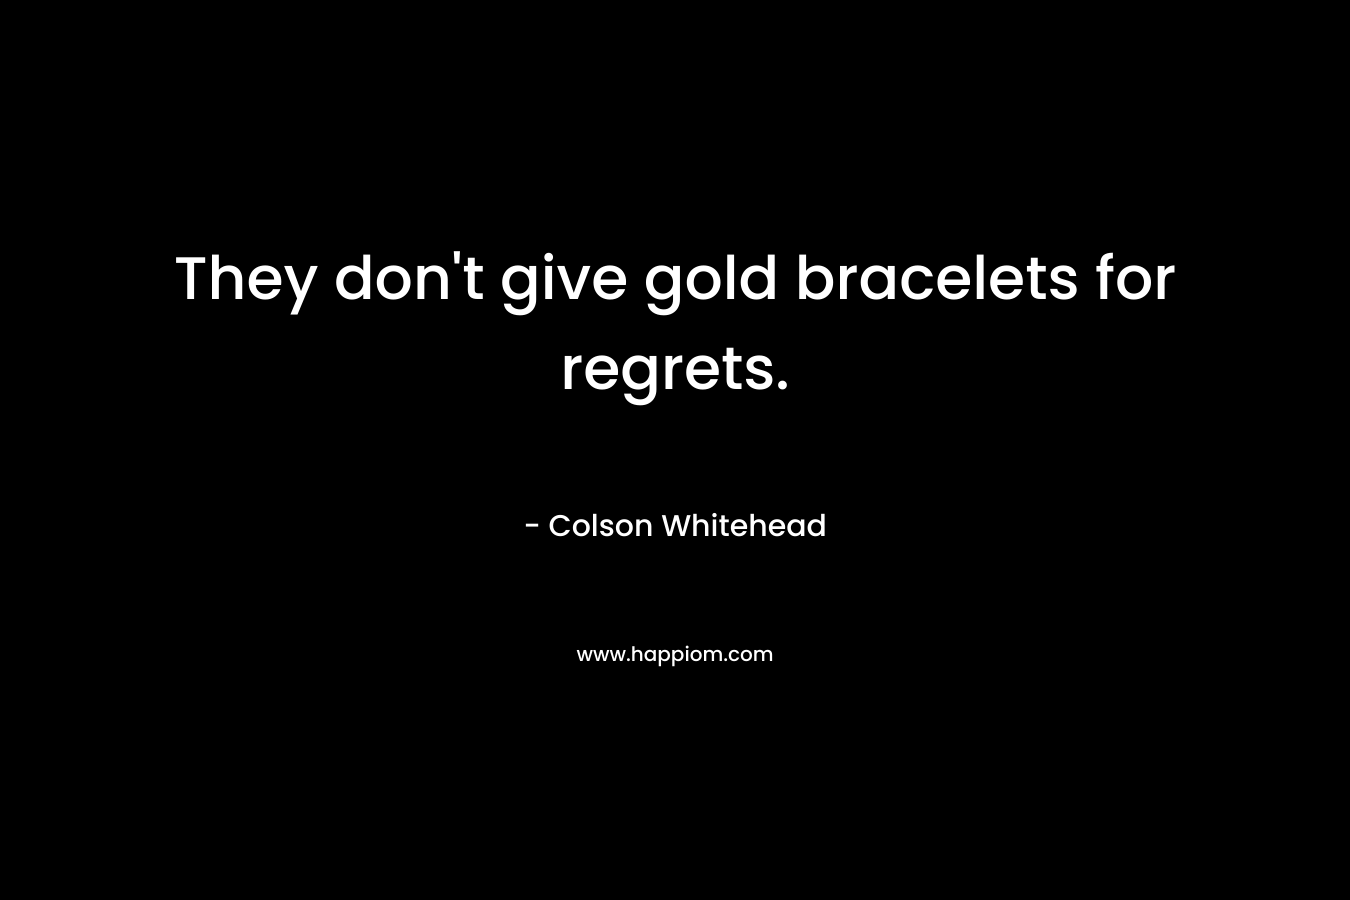 They don’t give gold bracelets for regrets. – Colson Whitehead